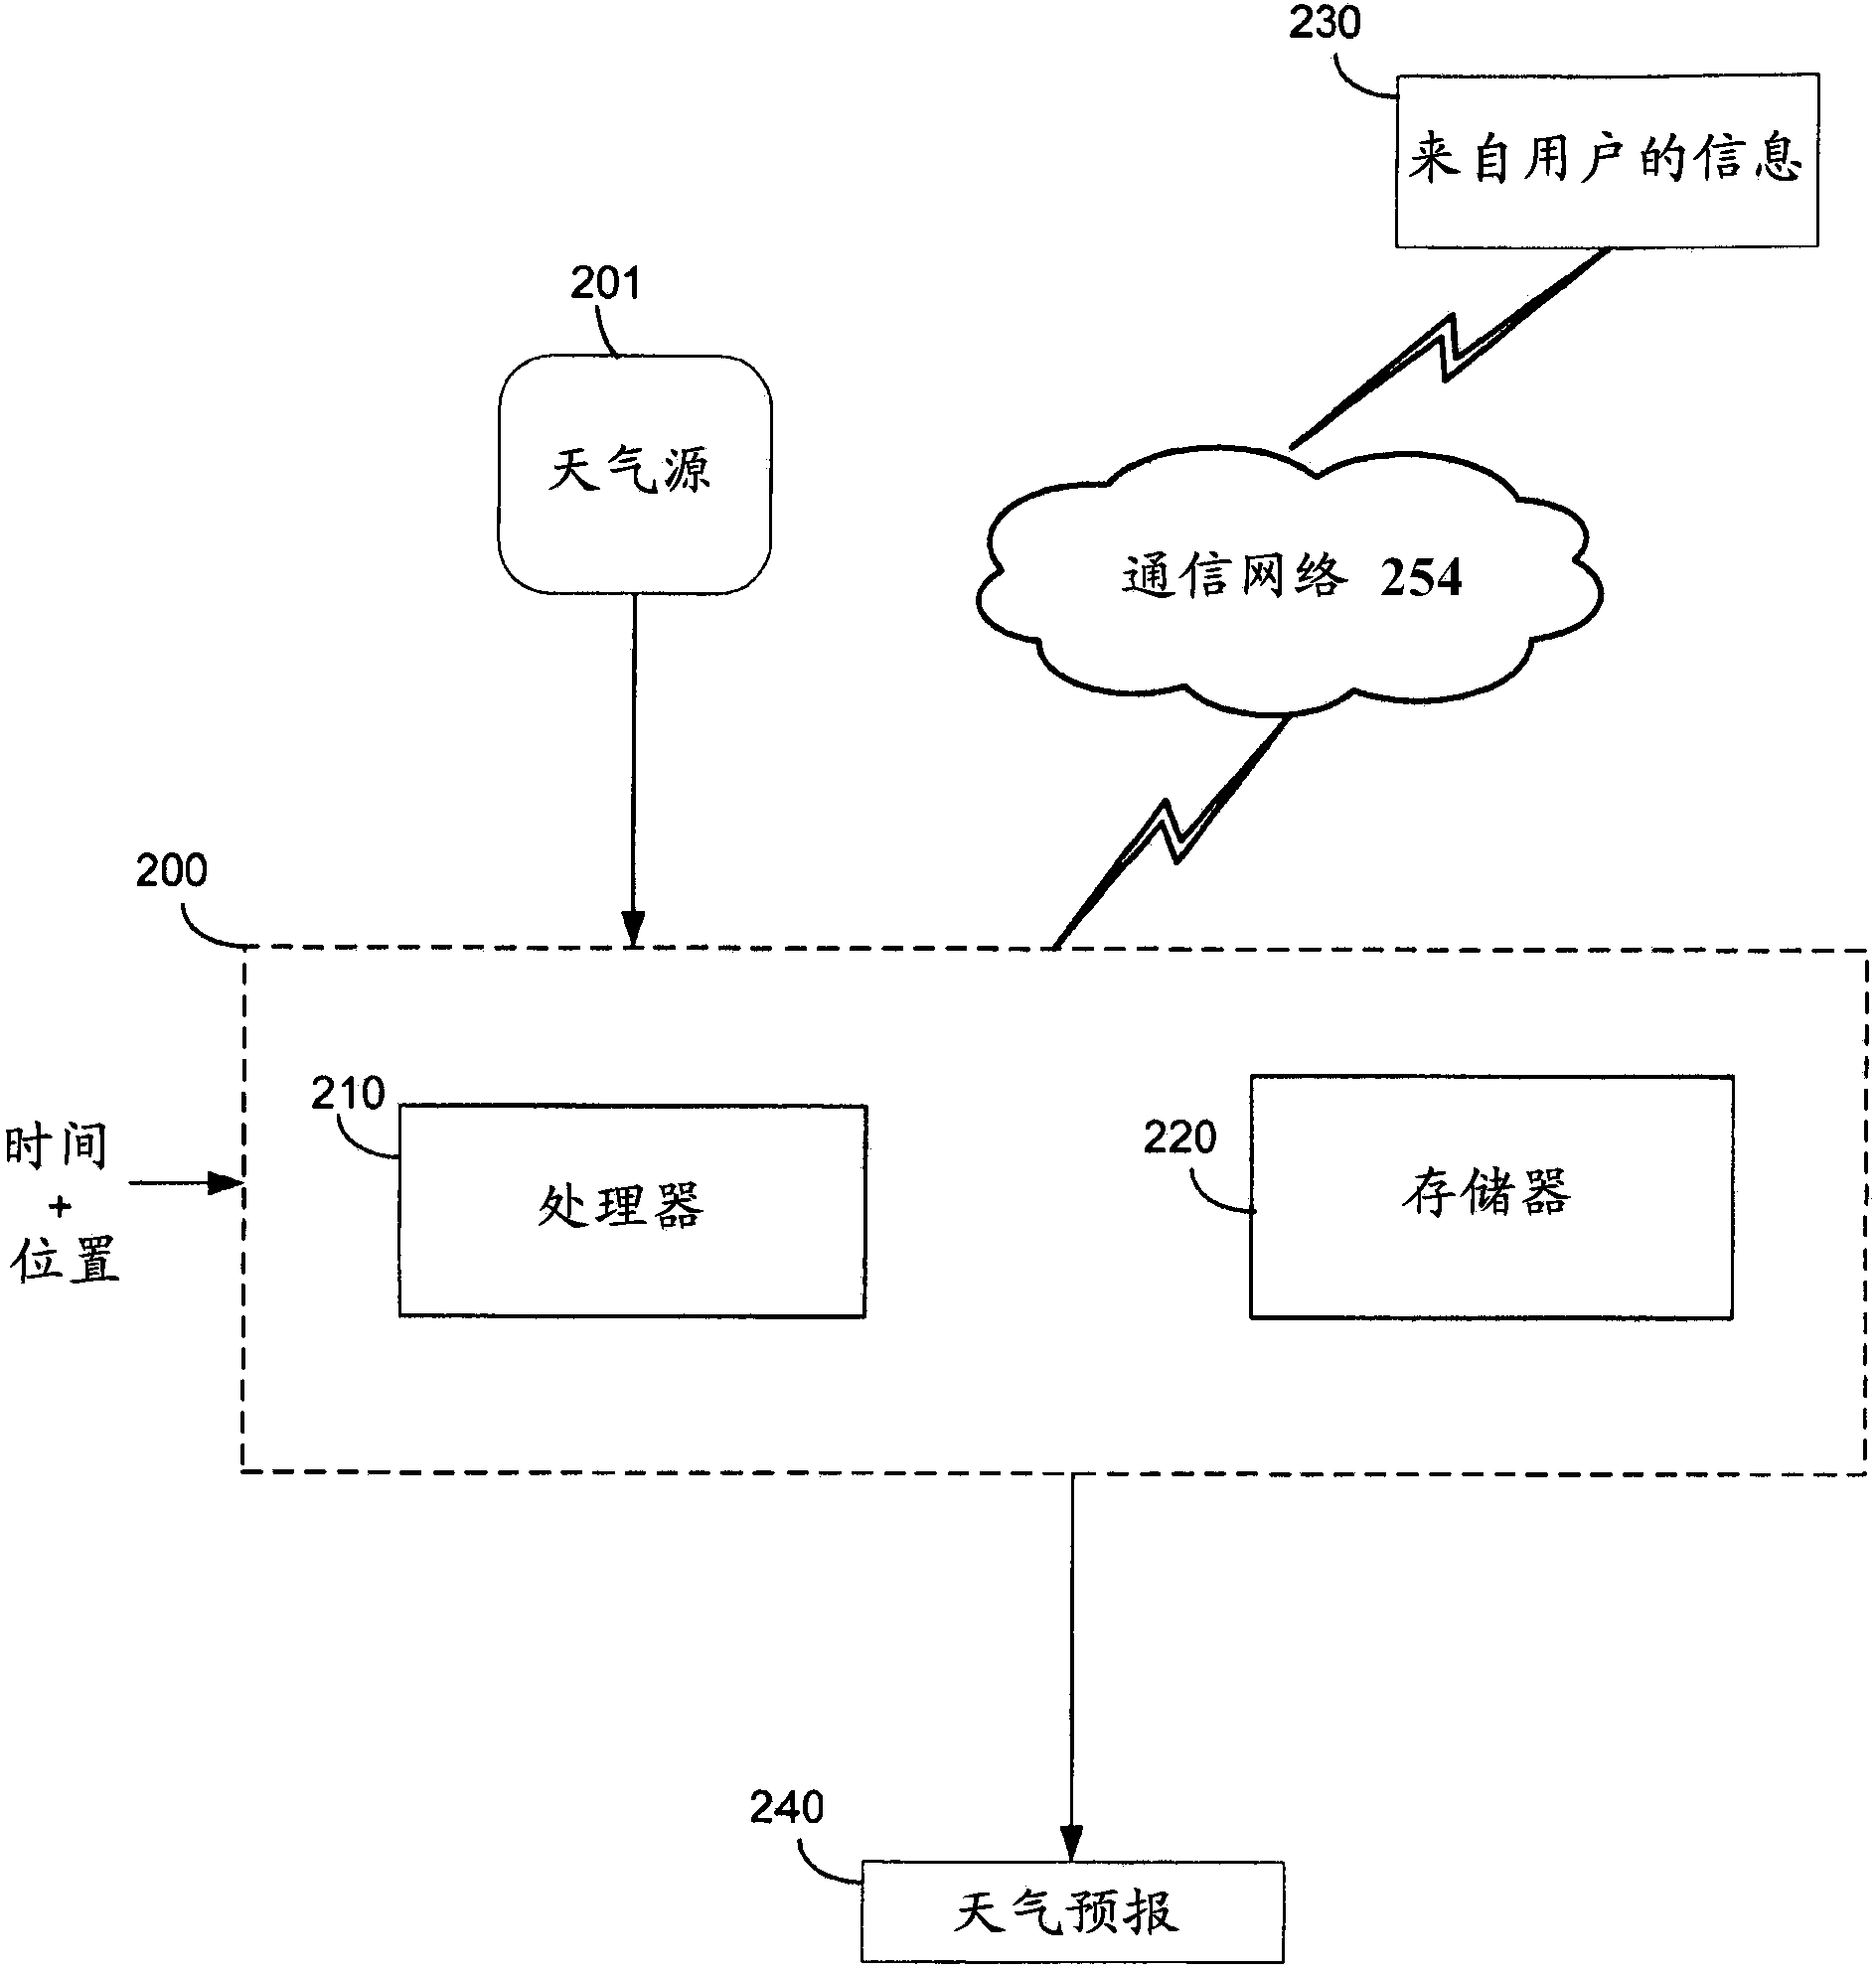 Method and system for displaying weather information on a timeline